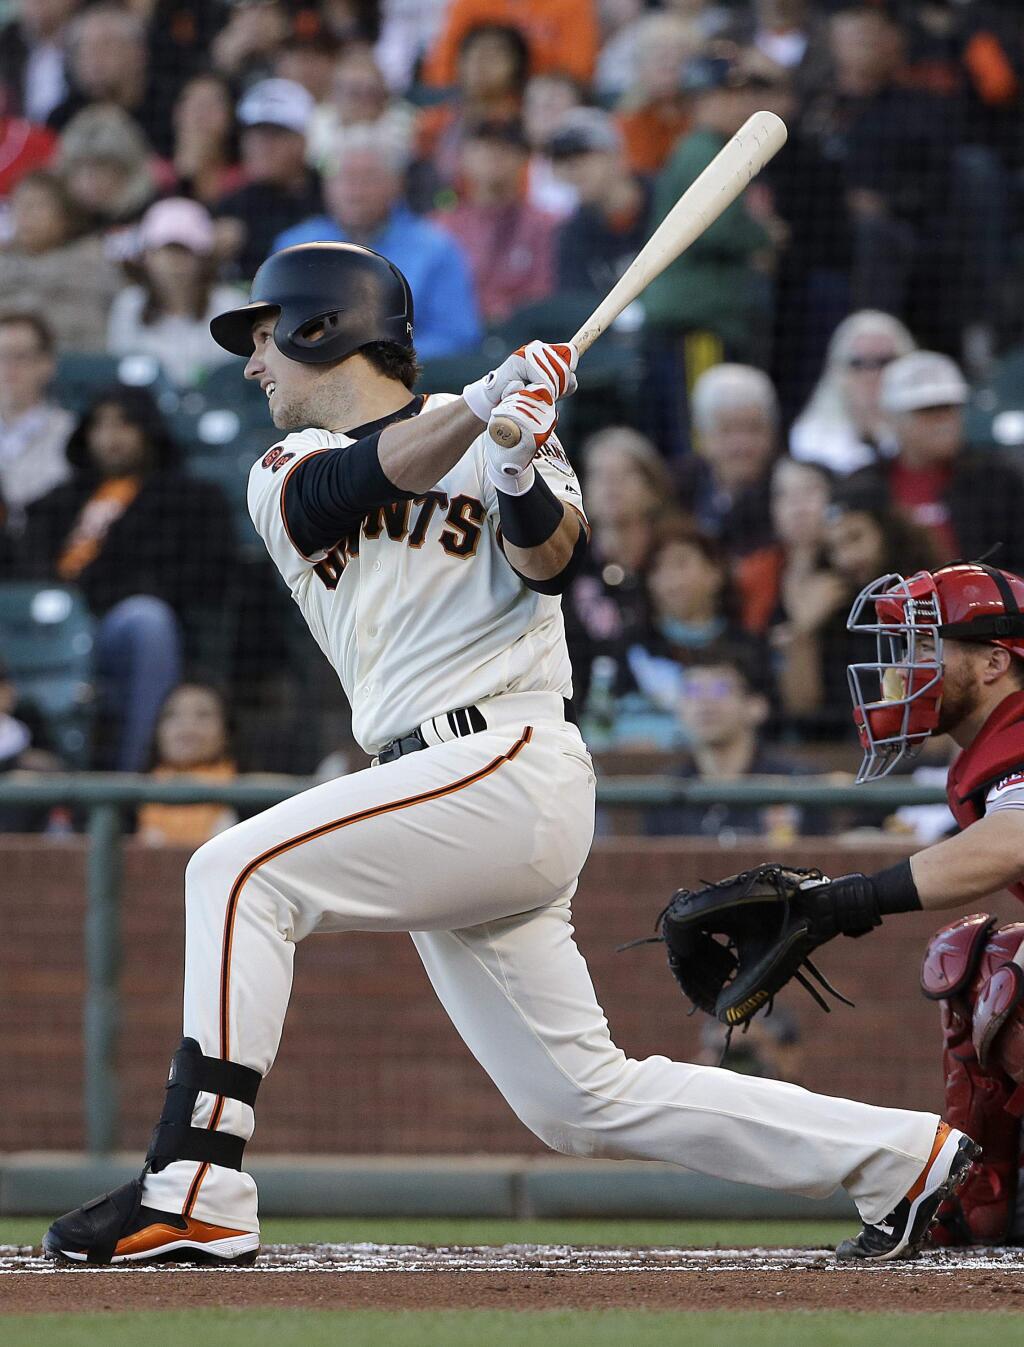 San Francisco Giants' Buster Posey hits an RBI-single against the Cincinnati Reds during the first inning of a baseball game in San Francisco, Monday, July 25, 2016. (AP Photo/Jeff Chiu)